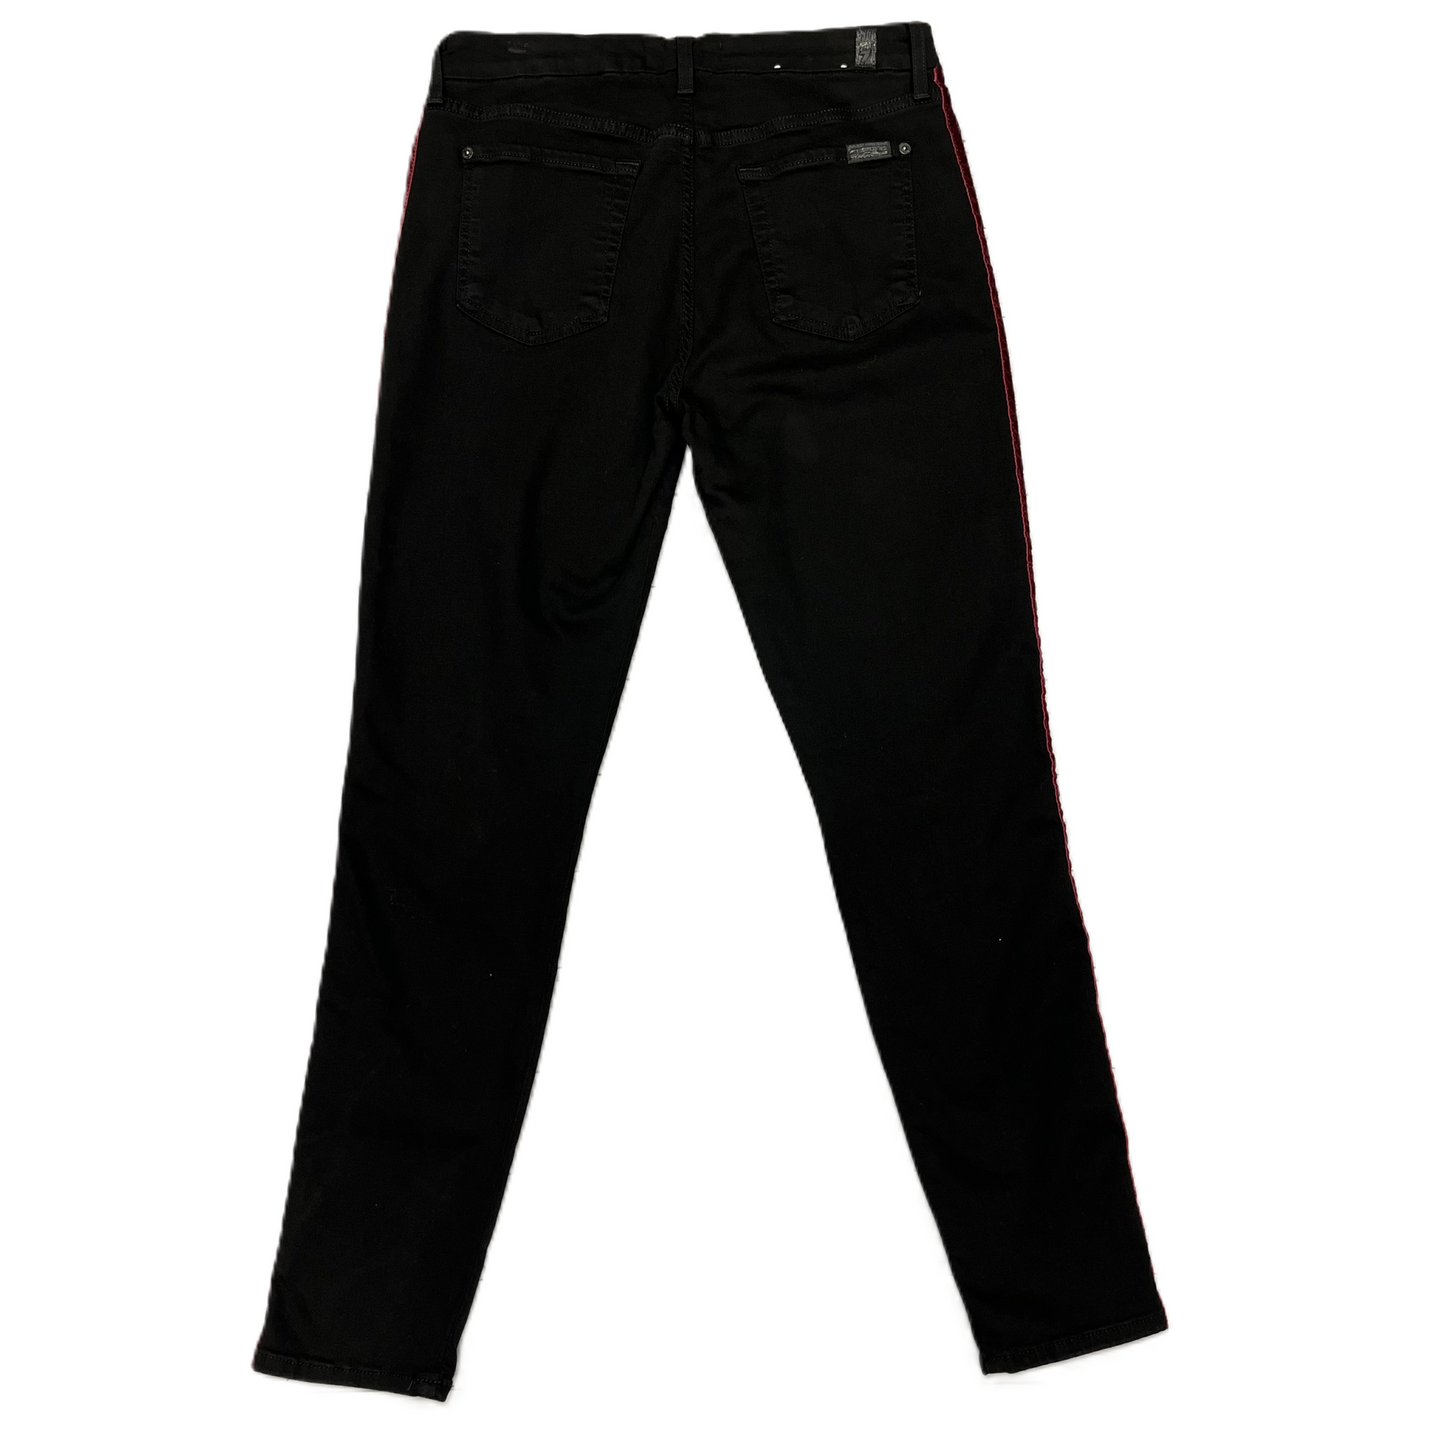 Black Red Jeans Straight By 7 For All Mankind, Size: 8